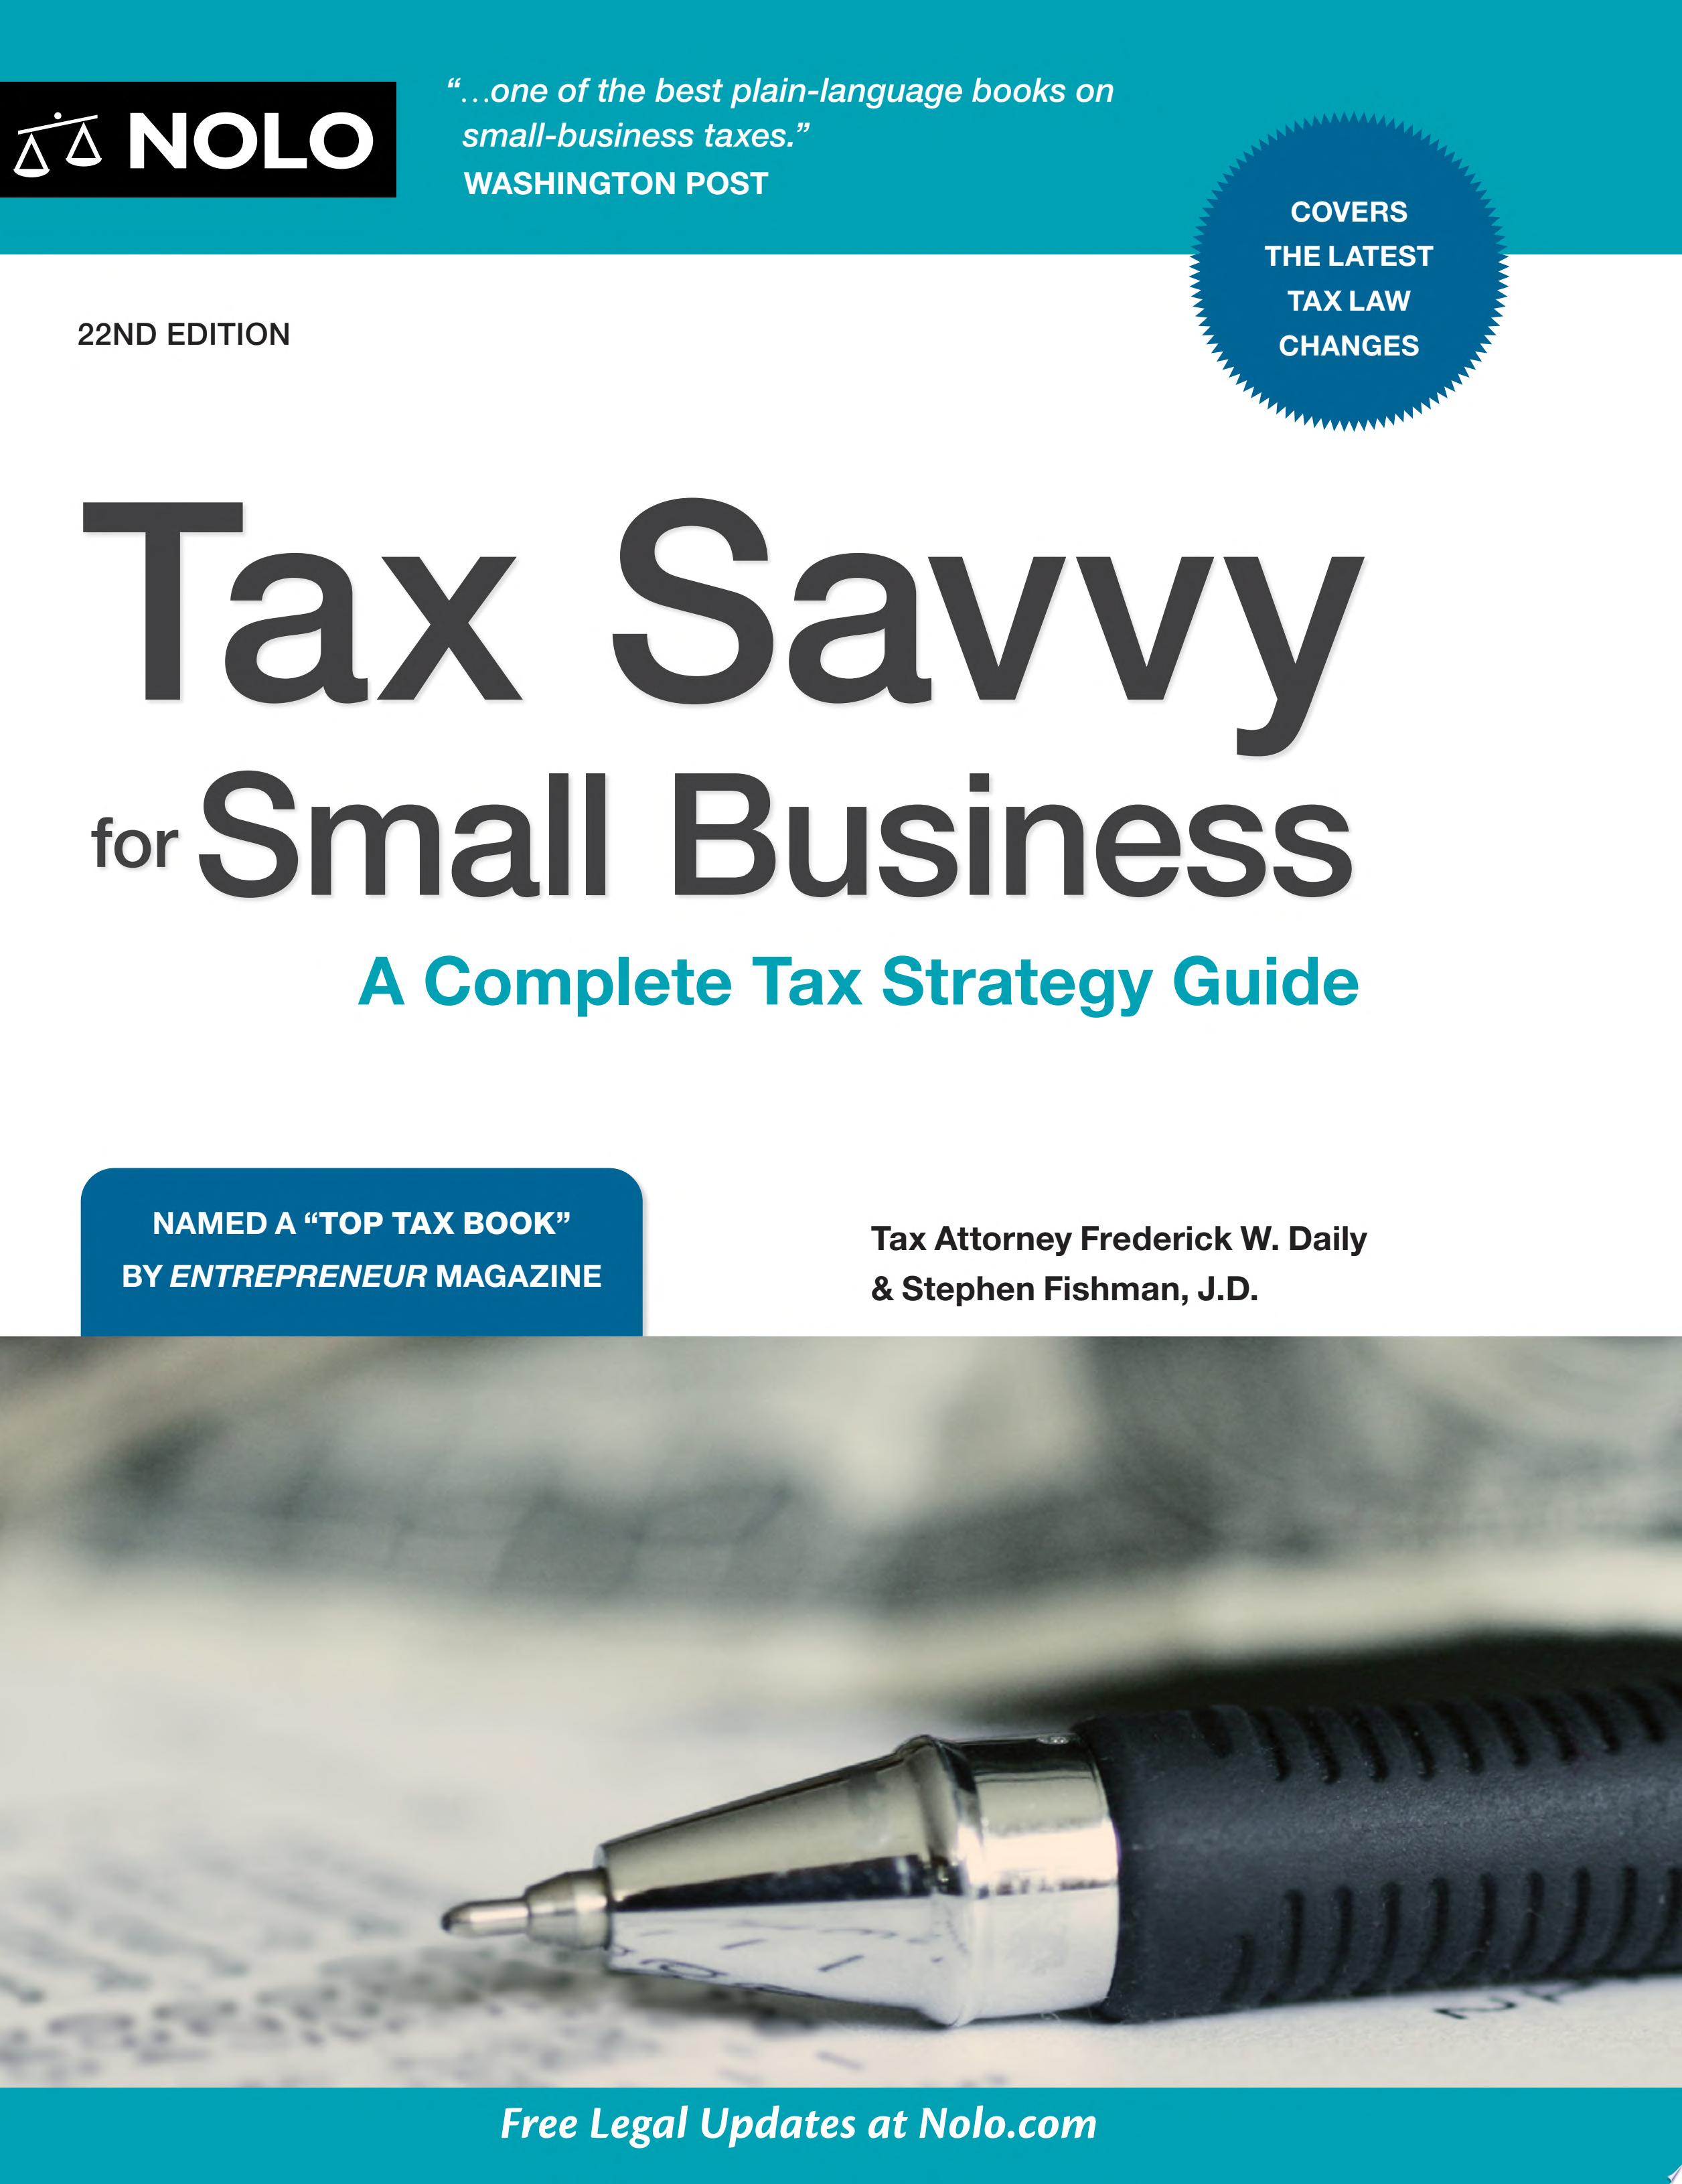 Image for "Tax Savvy for Small Business"